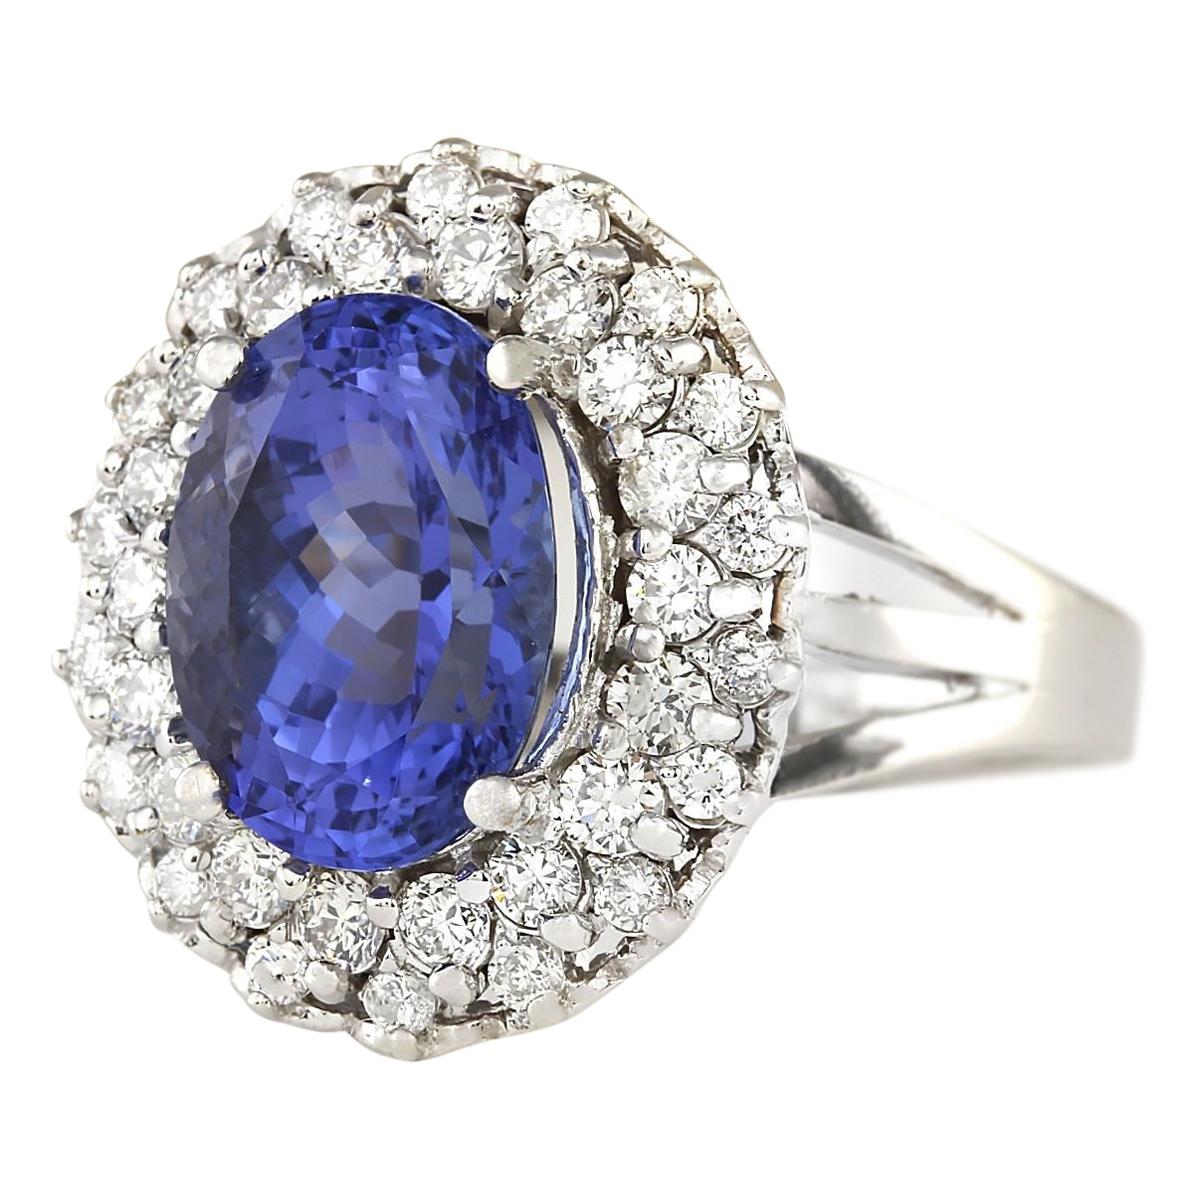 Discover elegance with our 7.82 Carat Tanzanite Ring, expertly crafted in 14K White Gold. The centerpiece of this luxurious piece is a mesmerizing tanzanite, weighing 6.62 carats and measuring 12.00x10.00 mm. Adorned with sparkling diamonds totaling